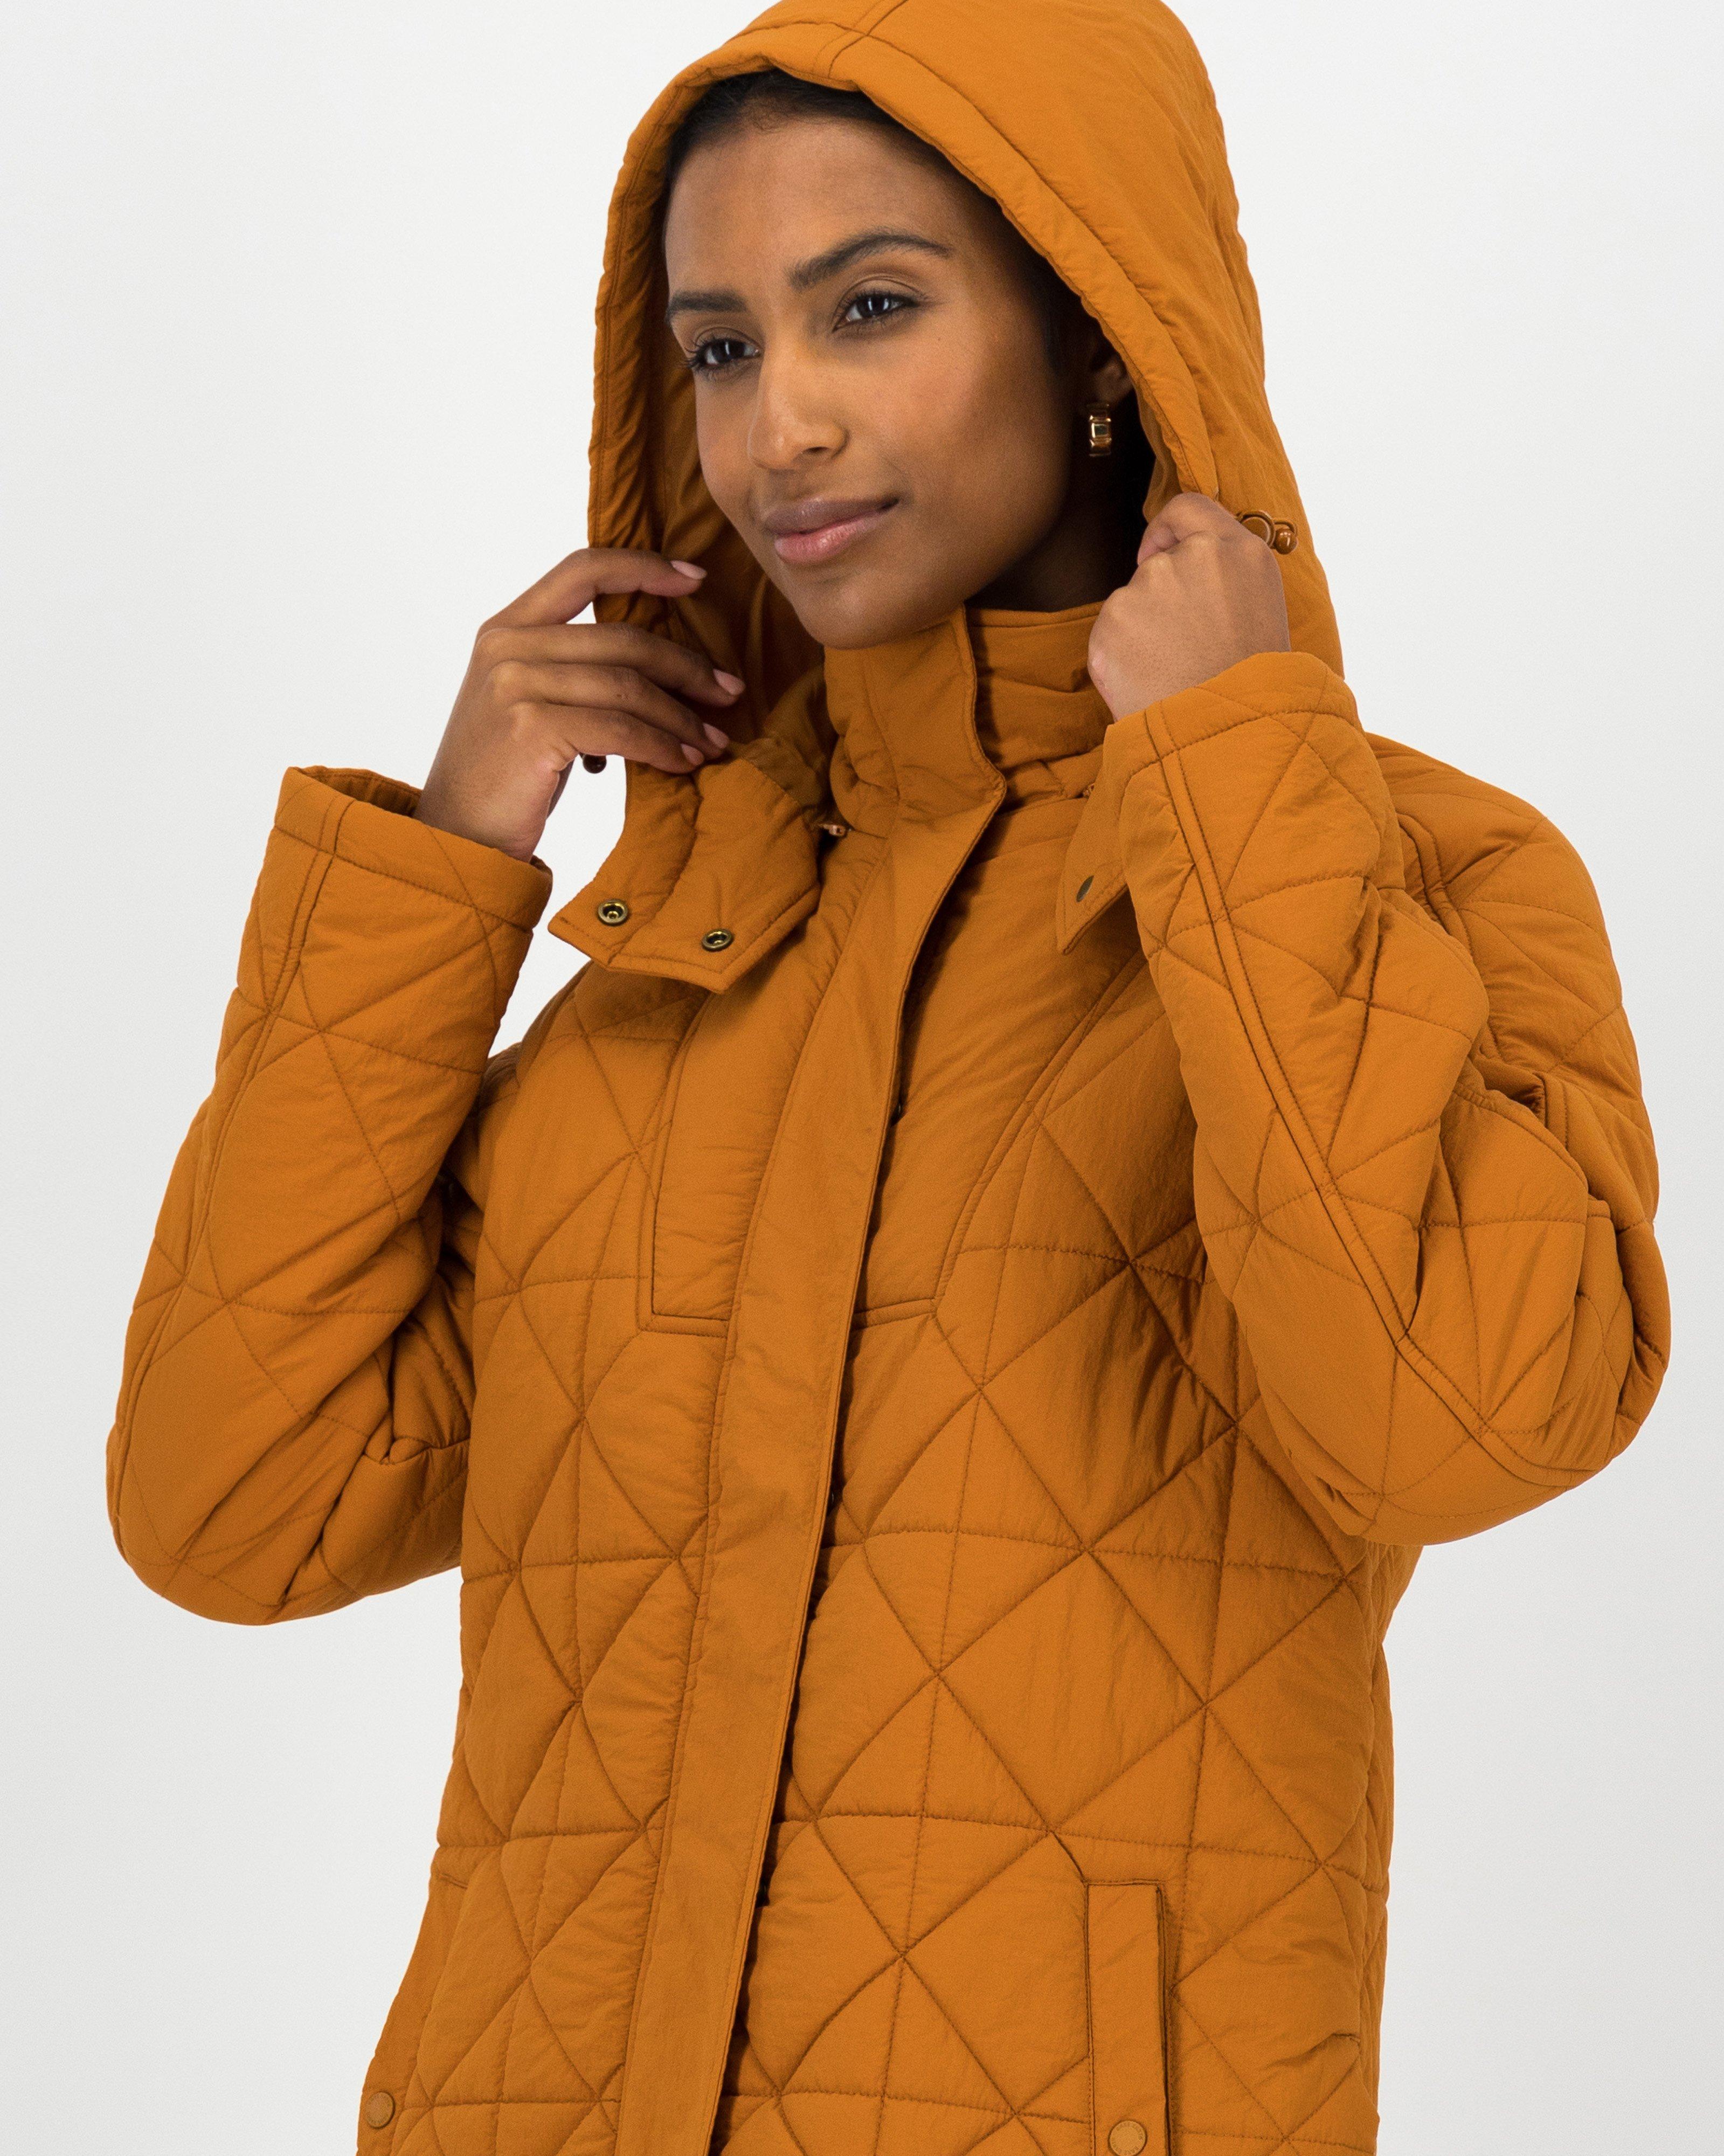 Rare Earth Women’s Pia Quilted Utility Jacket | Cape Union Mart